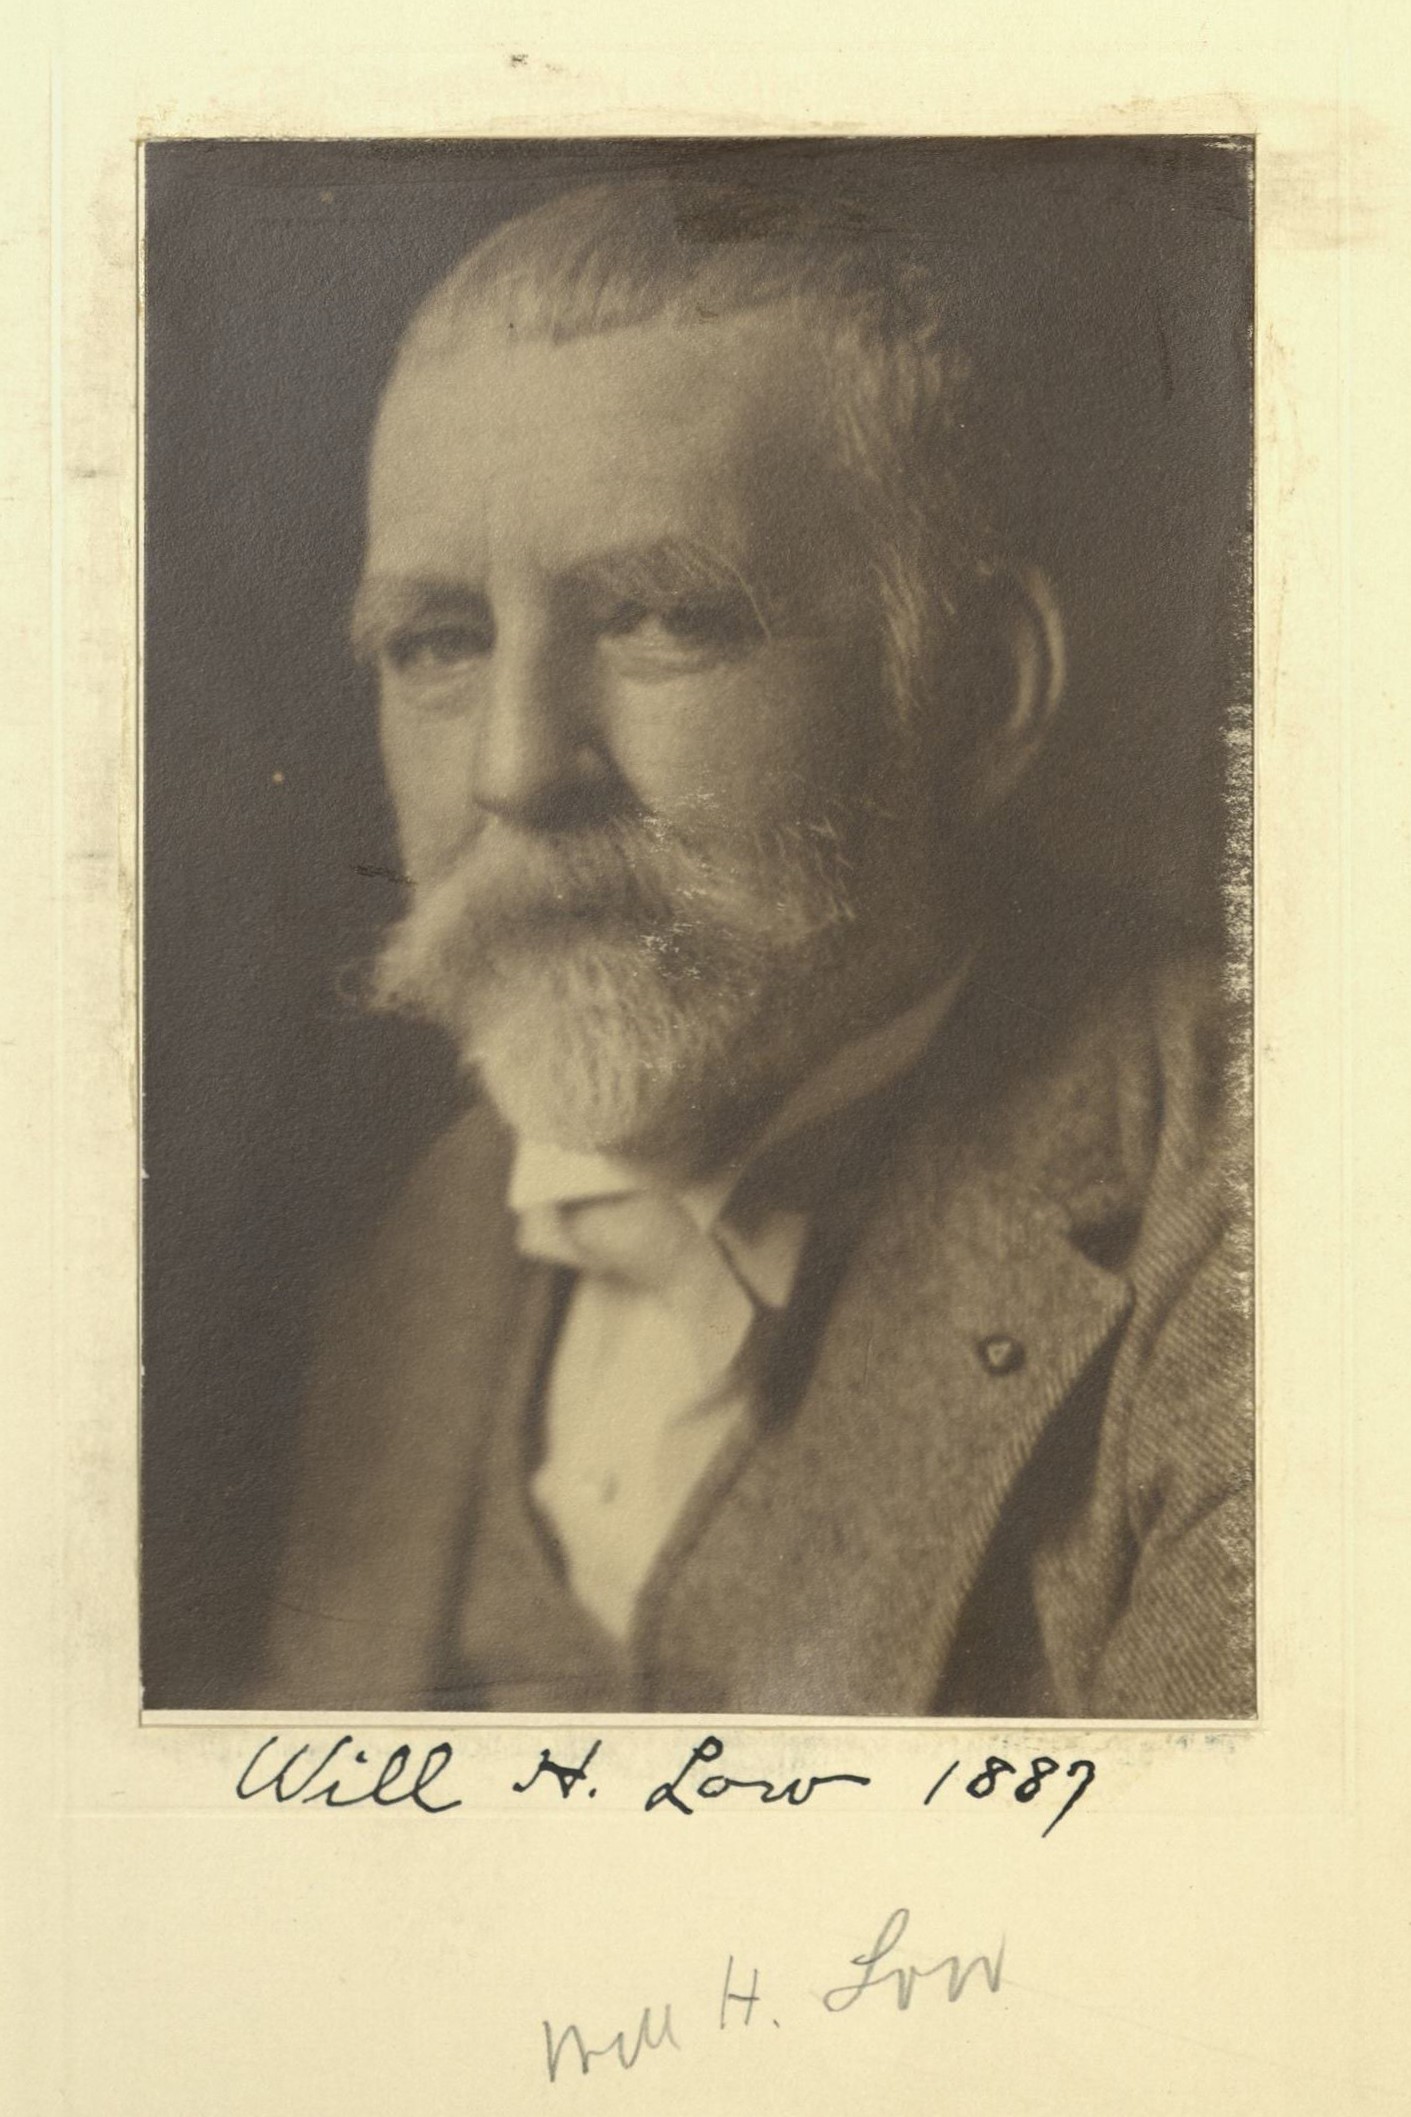 Member portrait of Will H. Low